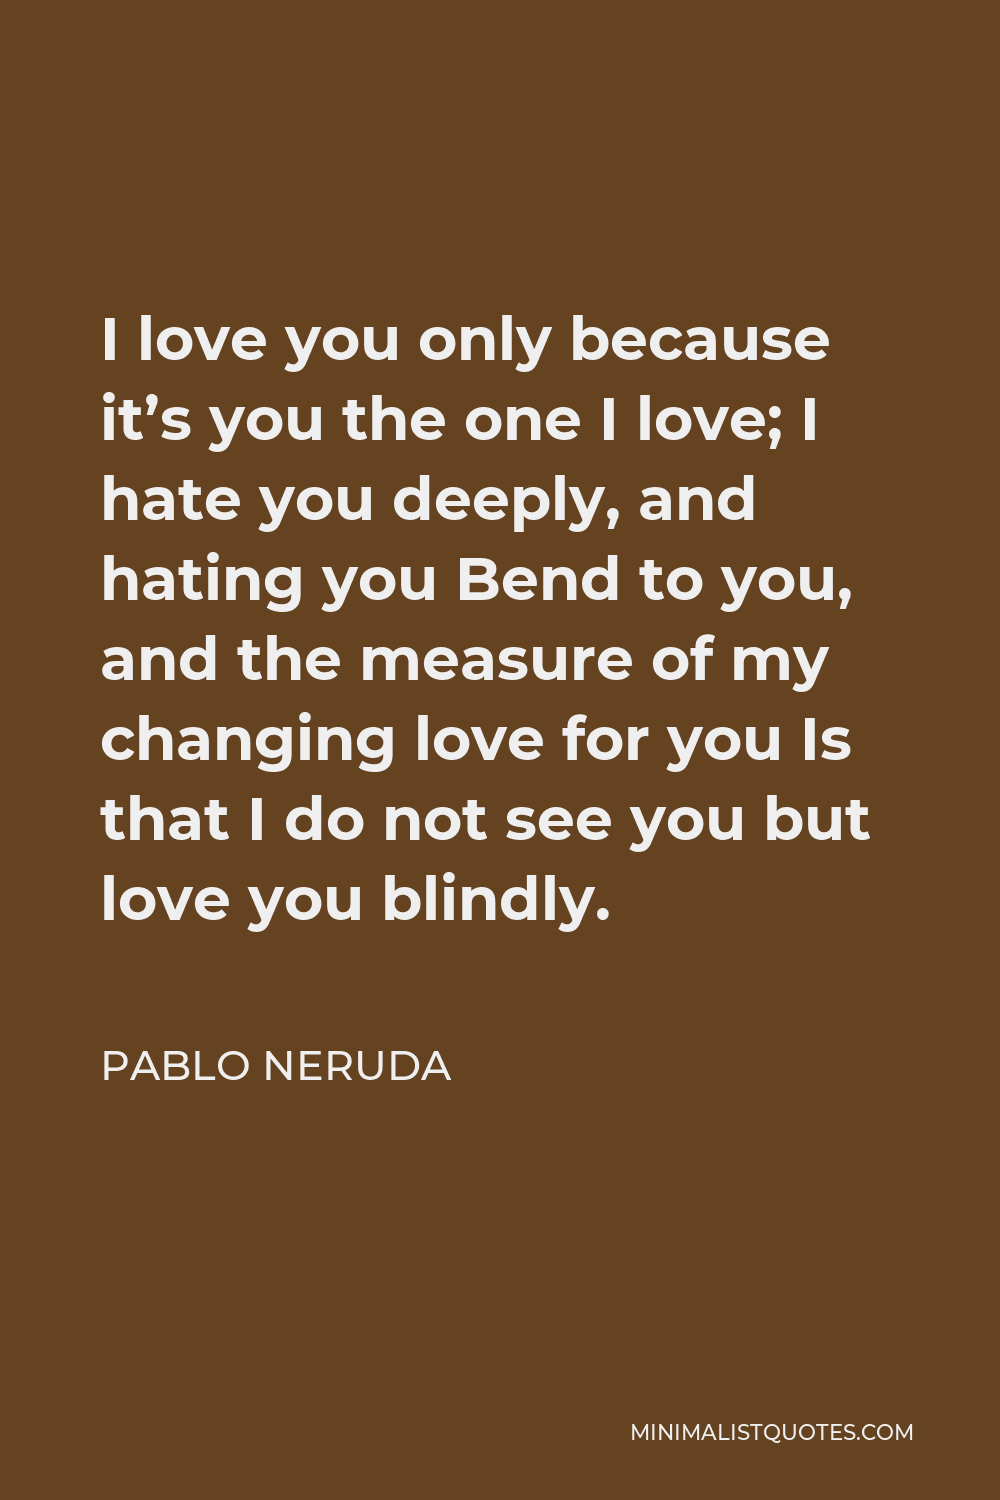 Pablo Neruda Quote - I love you only because it’s you the one I love; I hate you deeply, and hating you Bend to you, and the measure of my changing love for you Is that I do not see you but love you blindly.